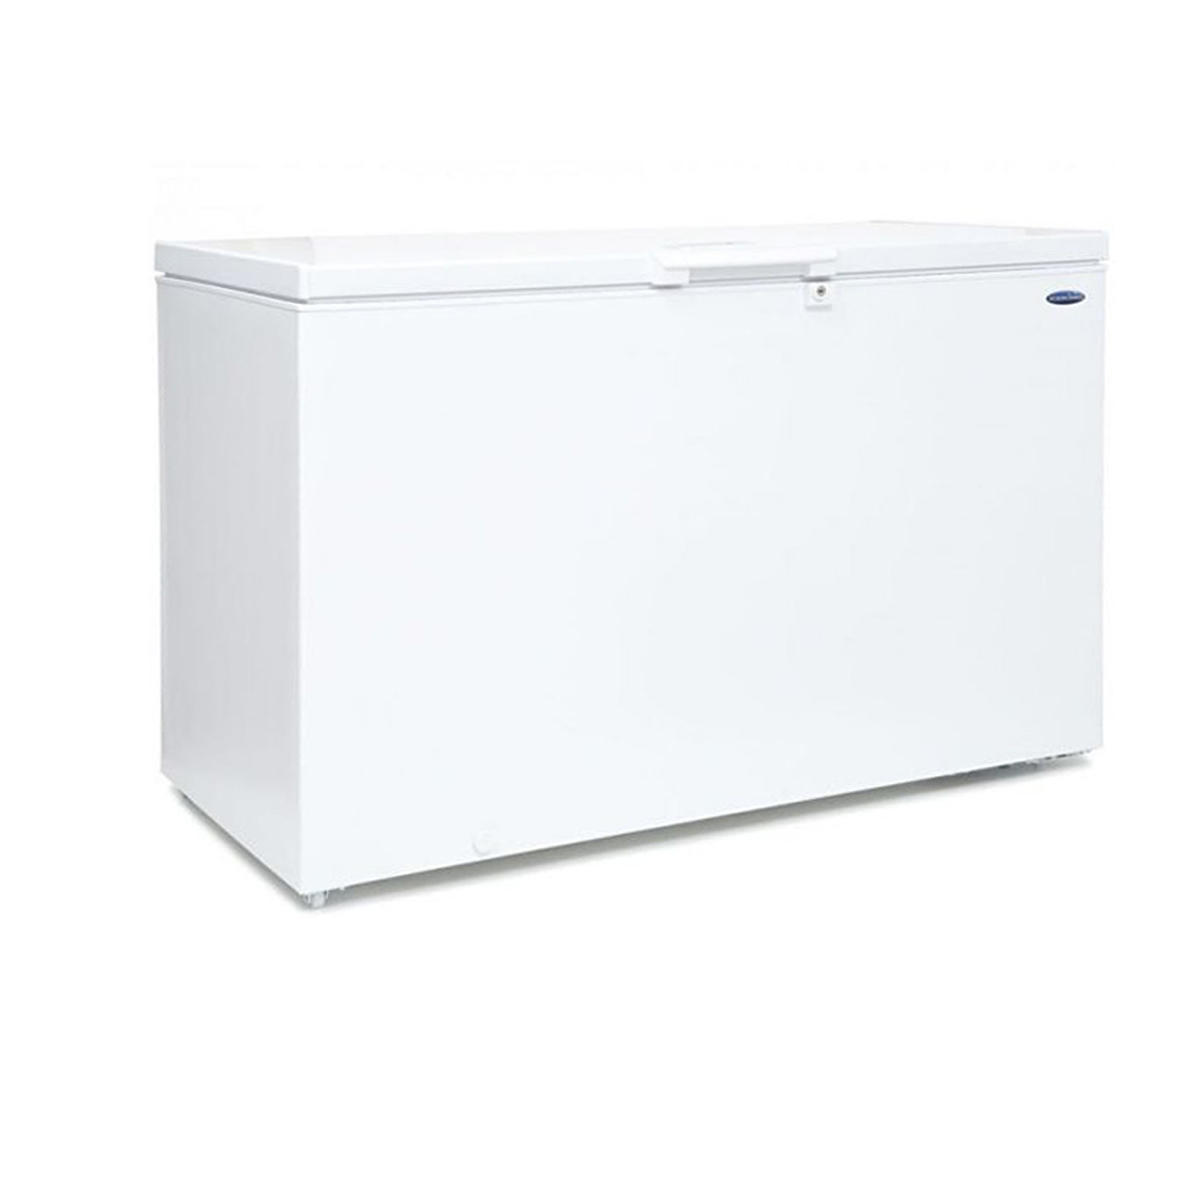 Ice-King 560litre Chest Freezer Class F White